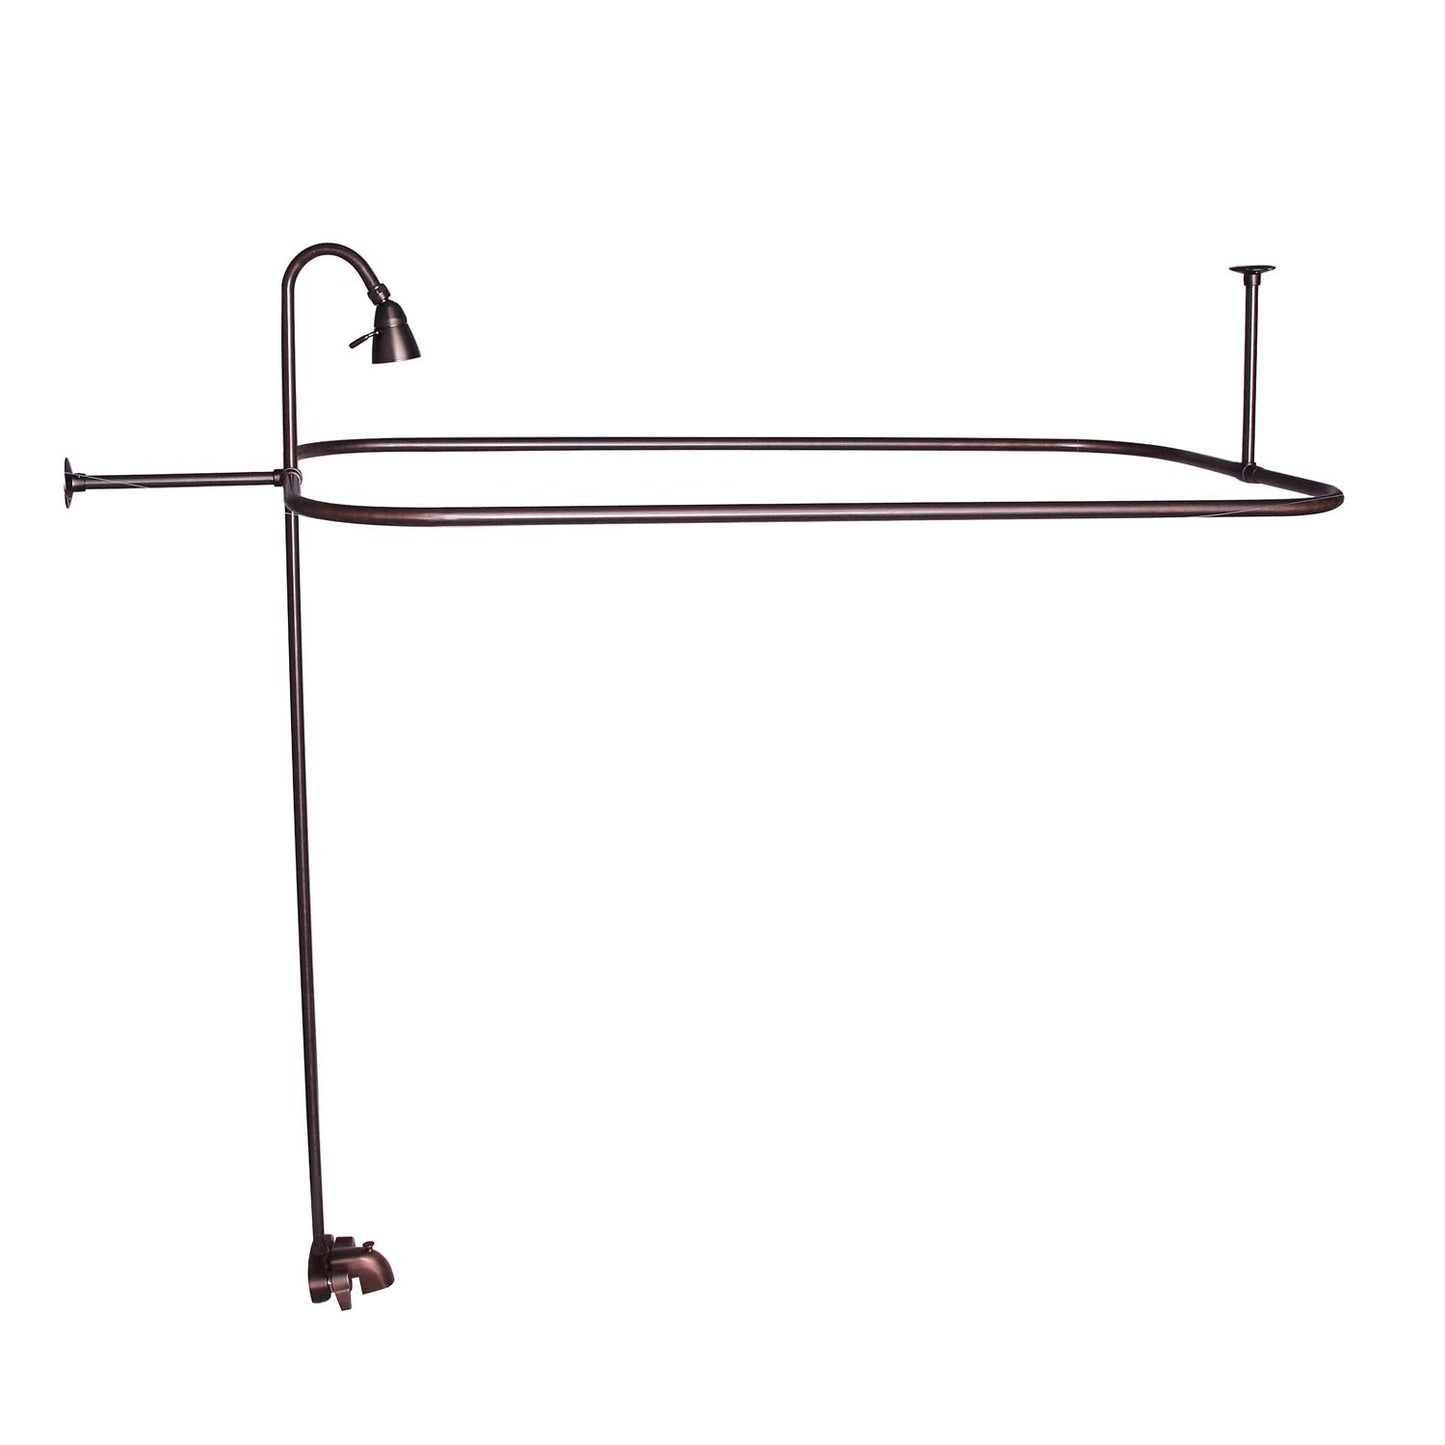 Complete Basic Tub Faucet & Shower Kit with 54" x 24" Rod, Shower Head, Oil Rubbed Bronze